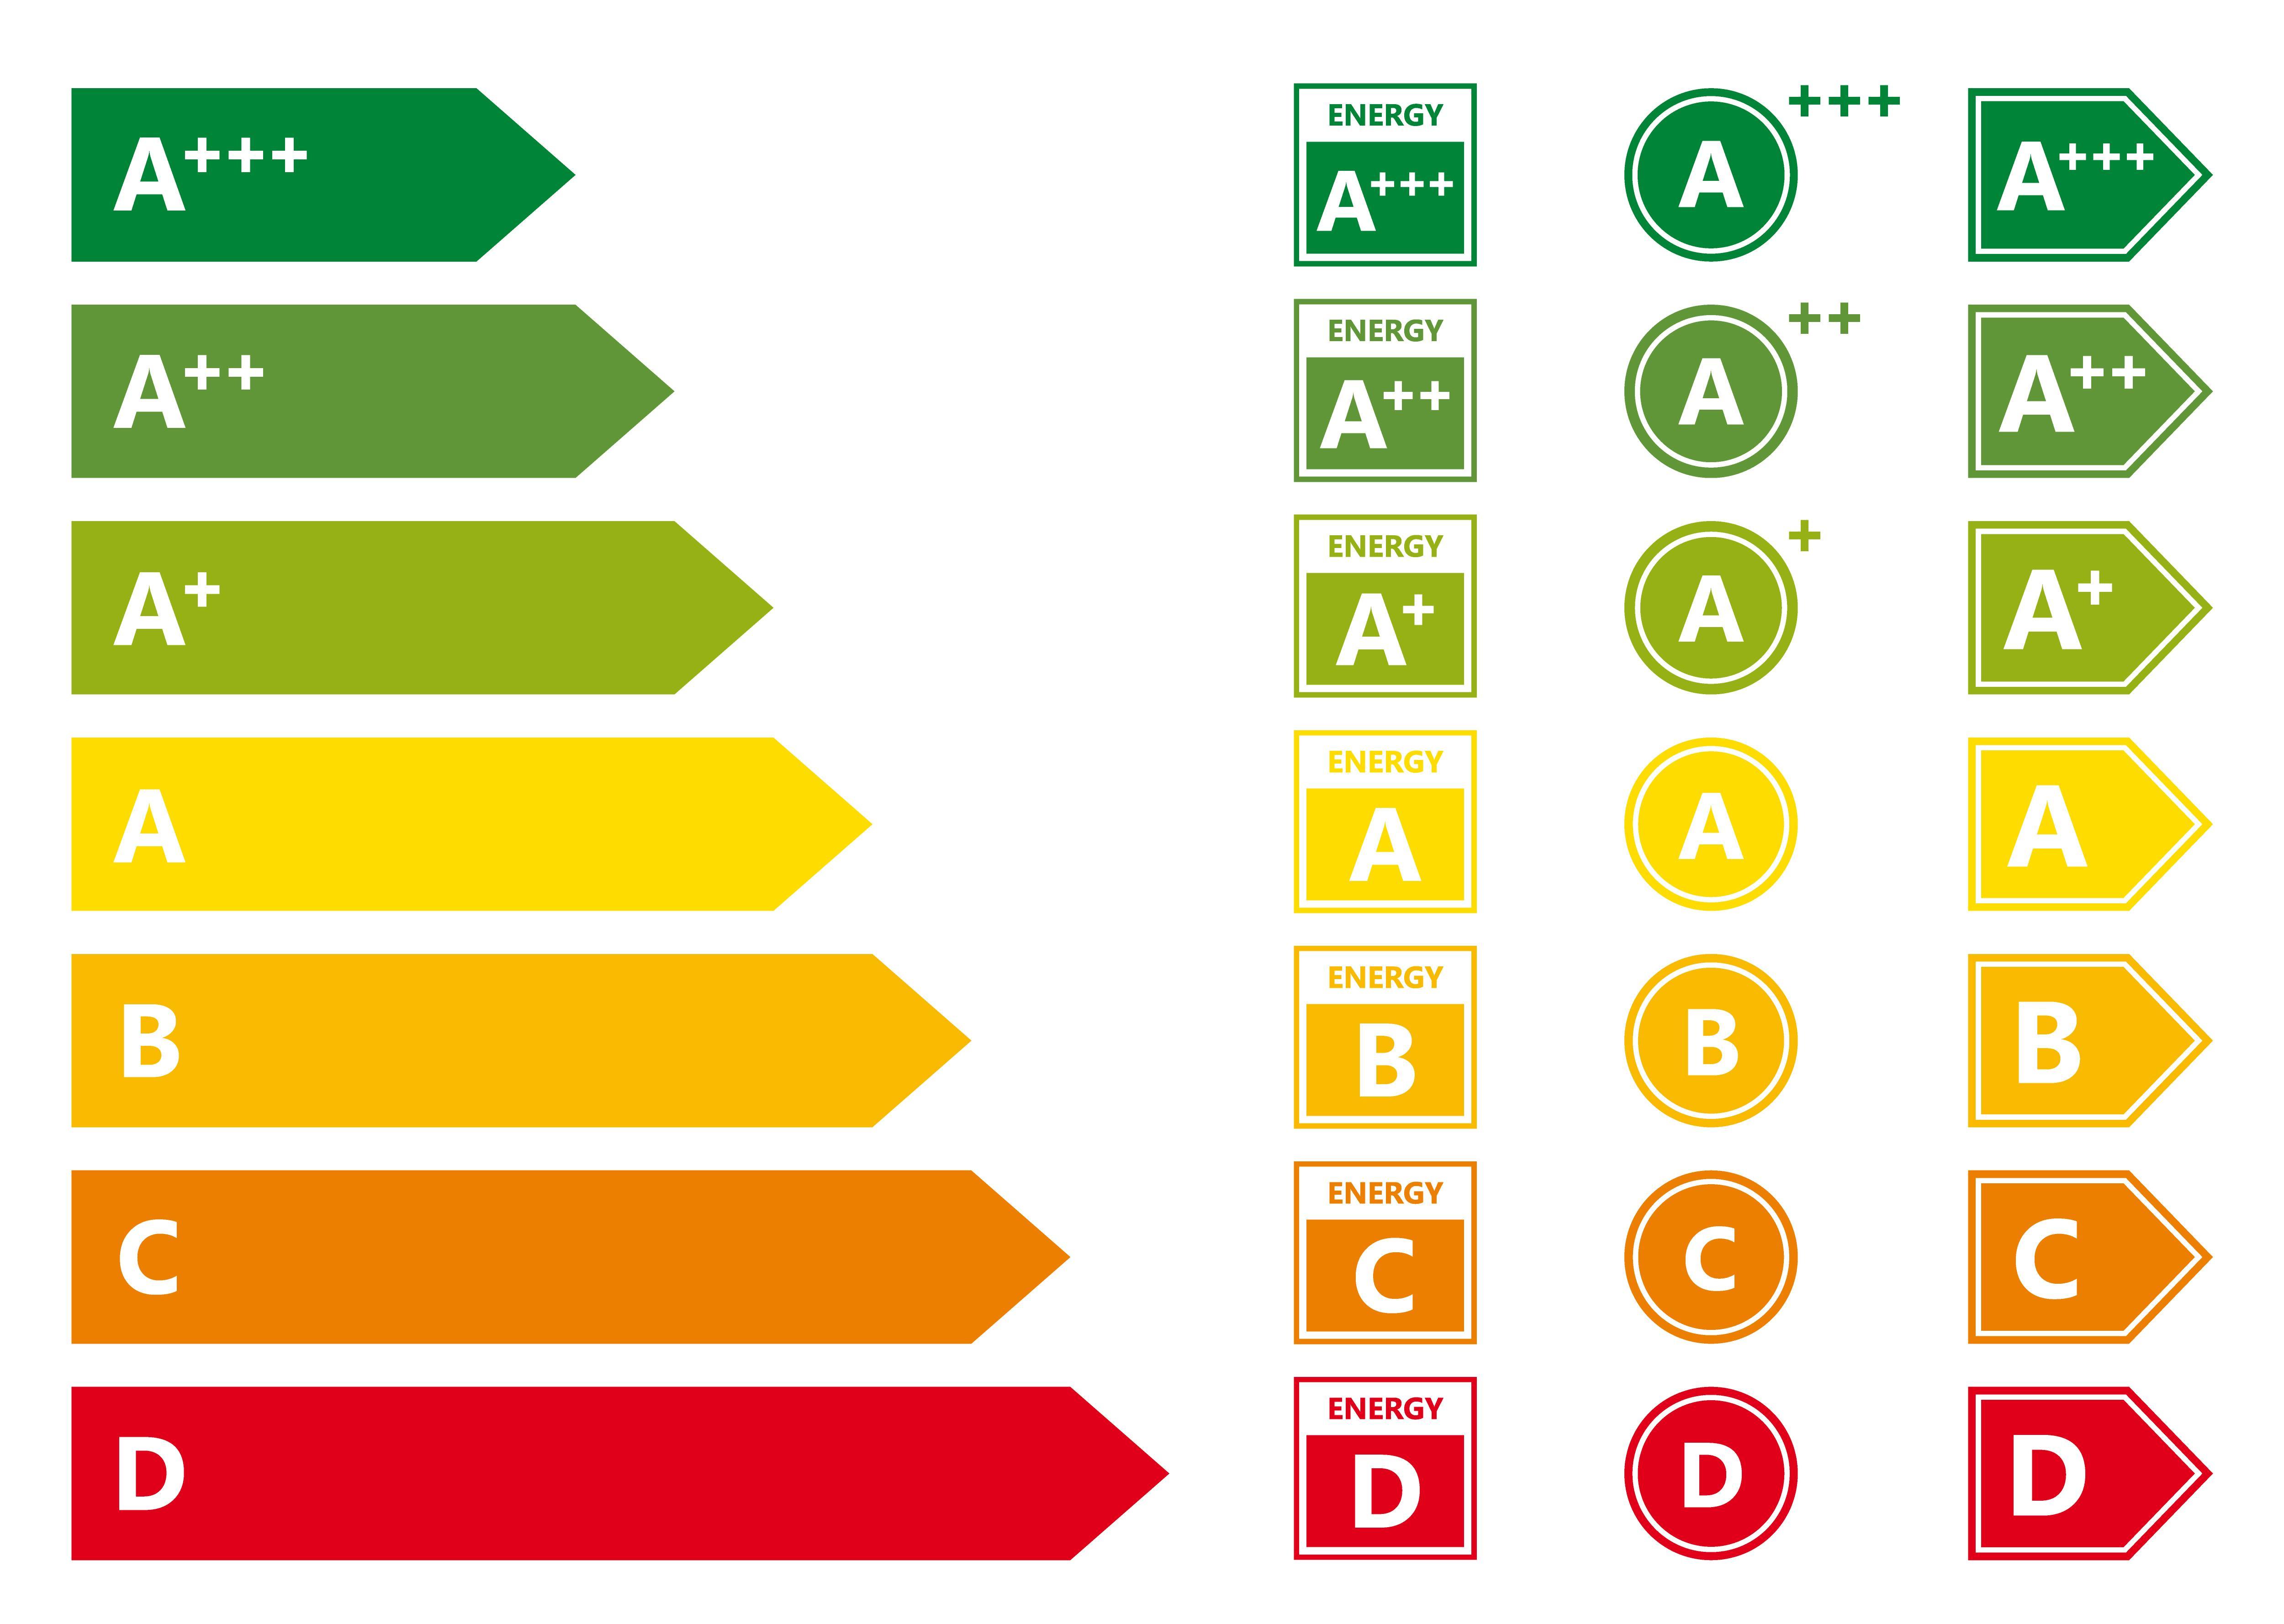 Why is an Energy Performance Certificate required for a rental property? Top tips for landlords